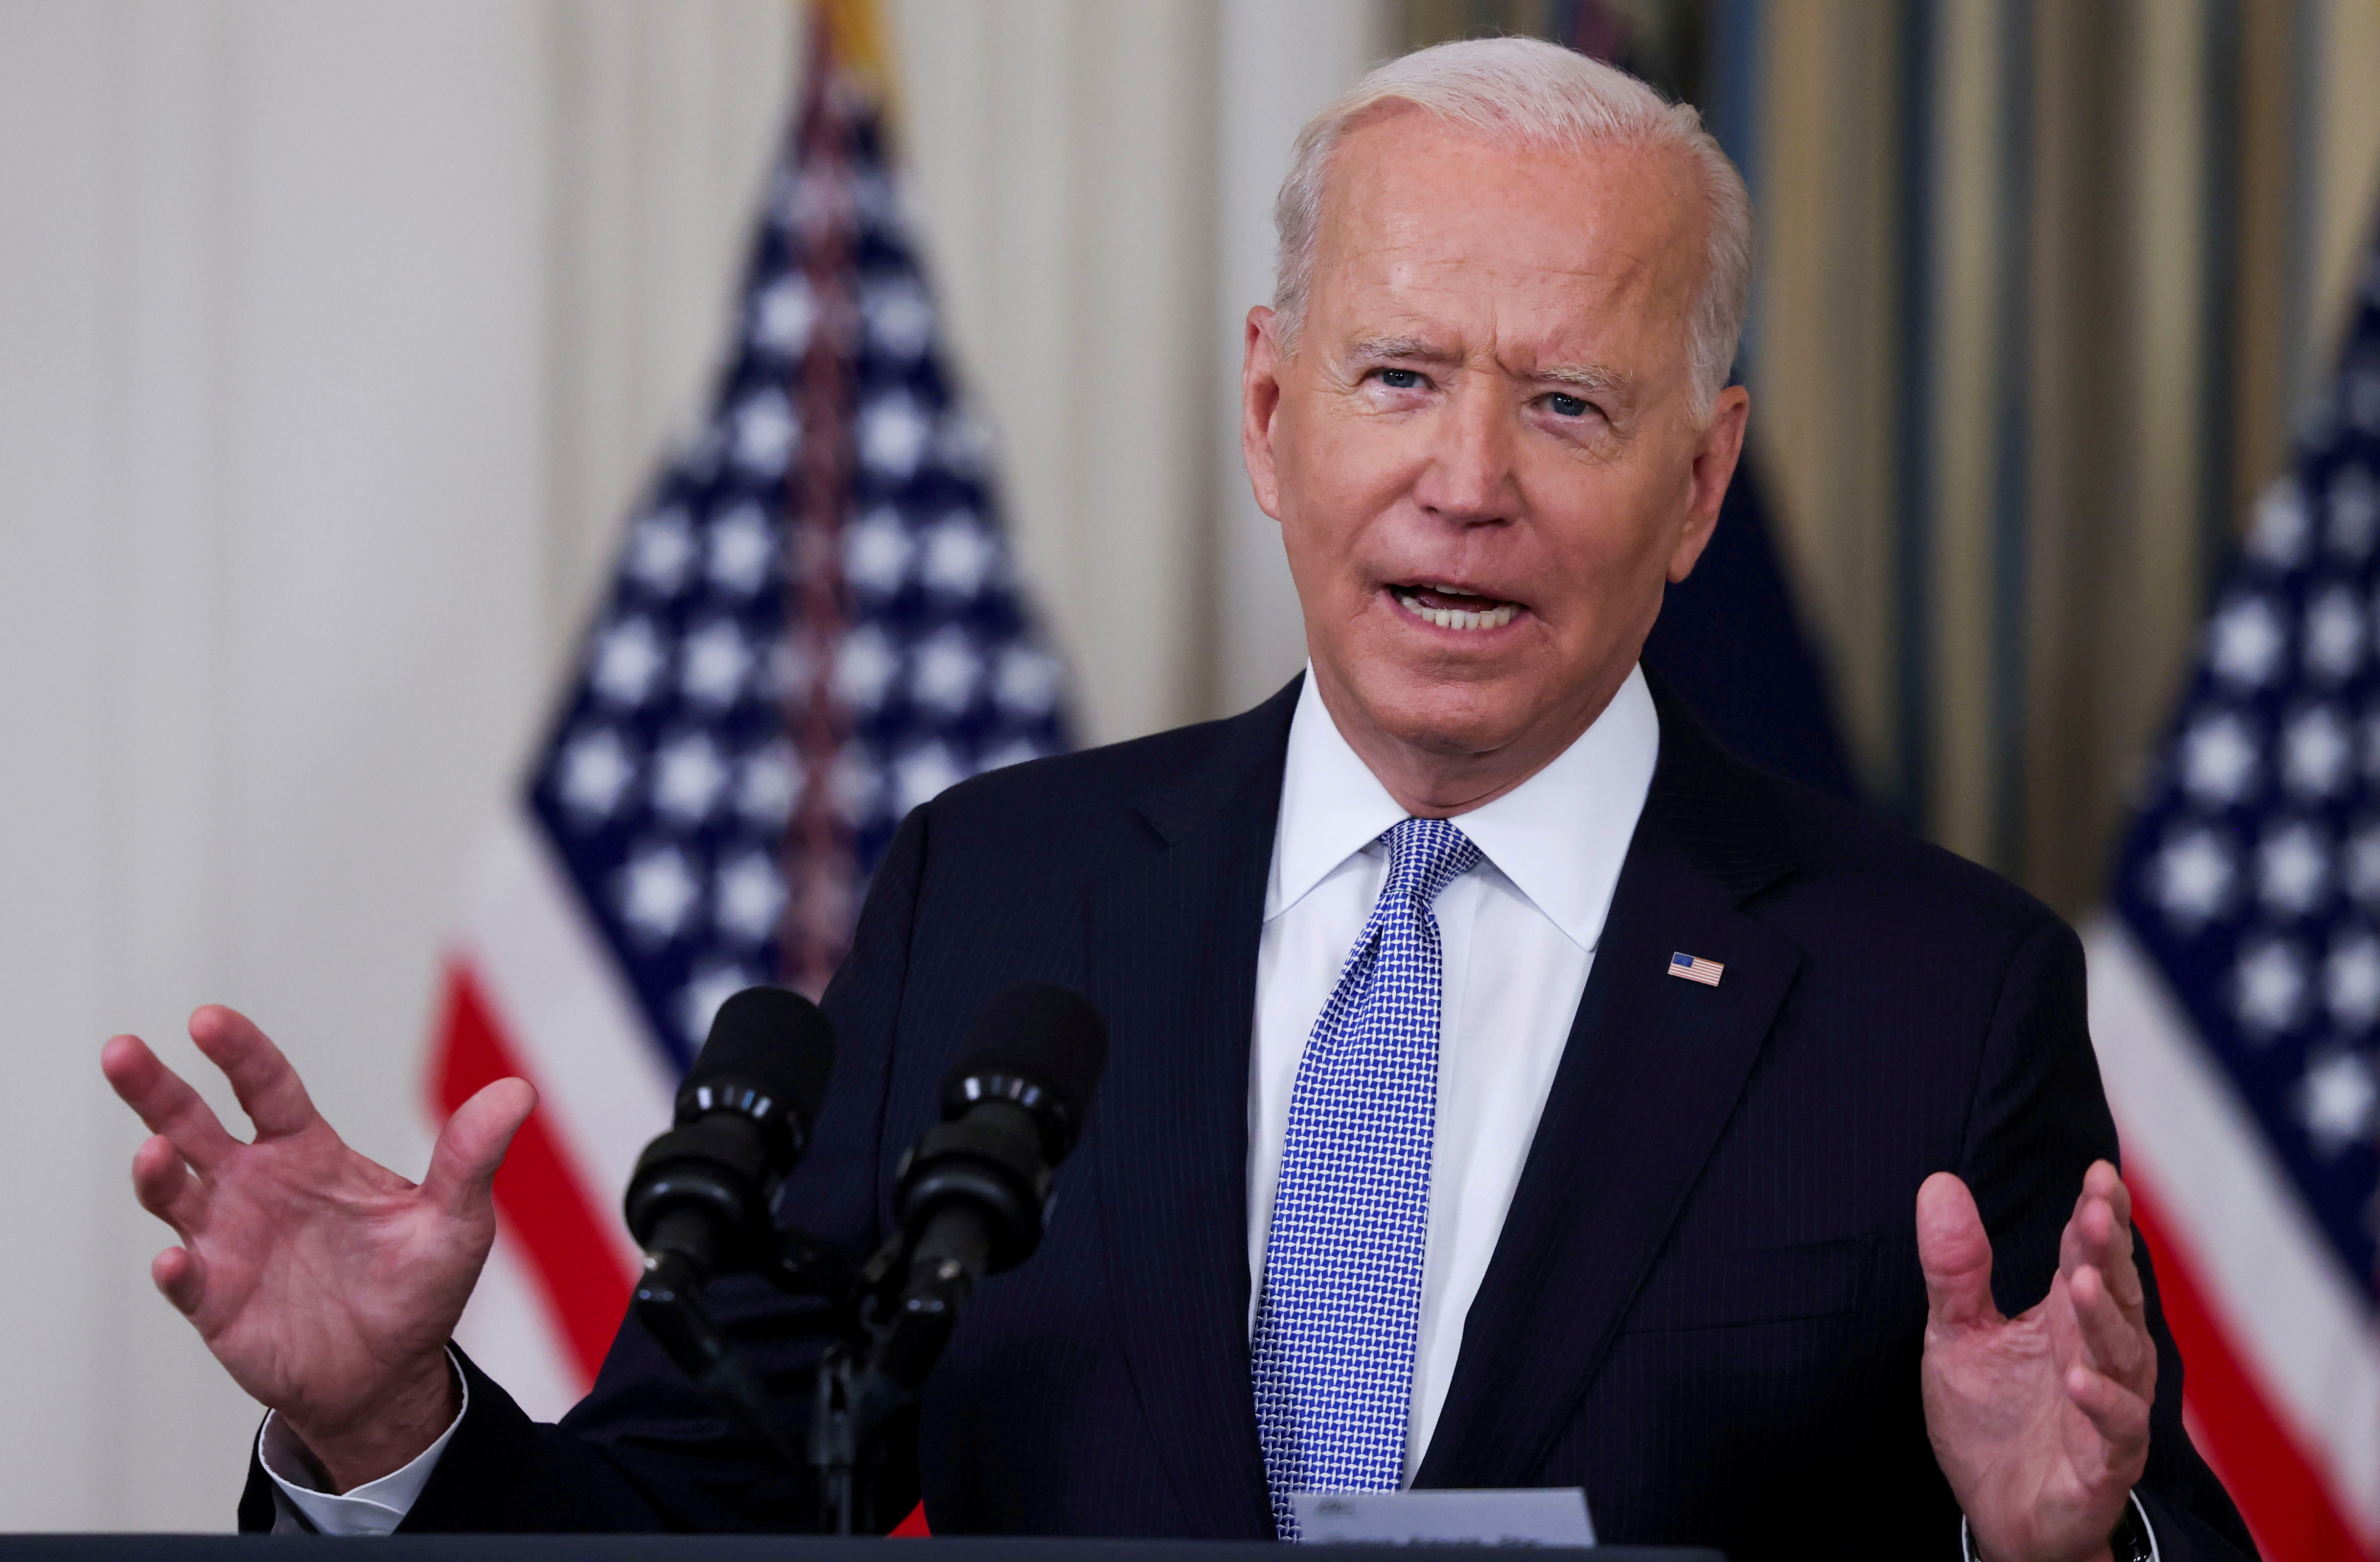 U.S. President Joe Biden responds to a question from a reporter after speaking about coronavirus disease (COVID-19) vaccines and booster shots in the State Dining Room at the White House in Washington, U.S., September 24, 2021. REUTERS/Evelyn Hockstein/File Photo